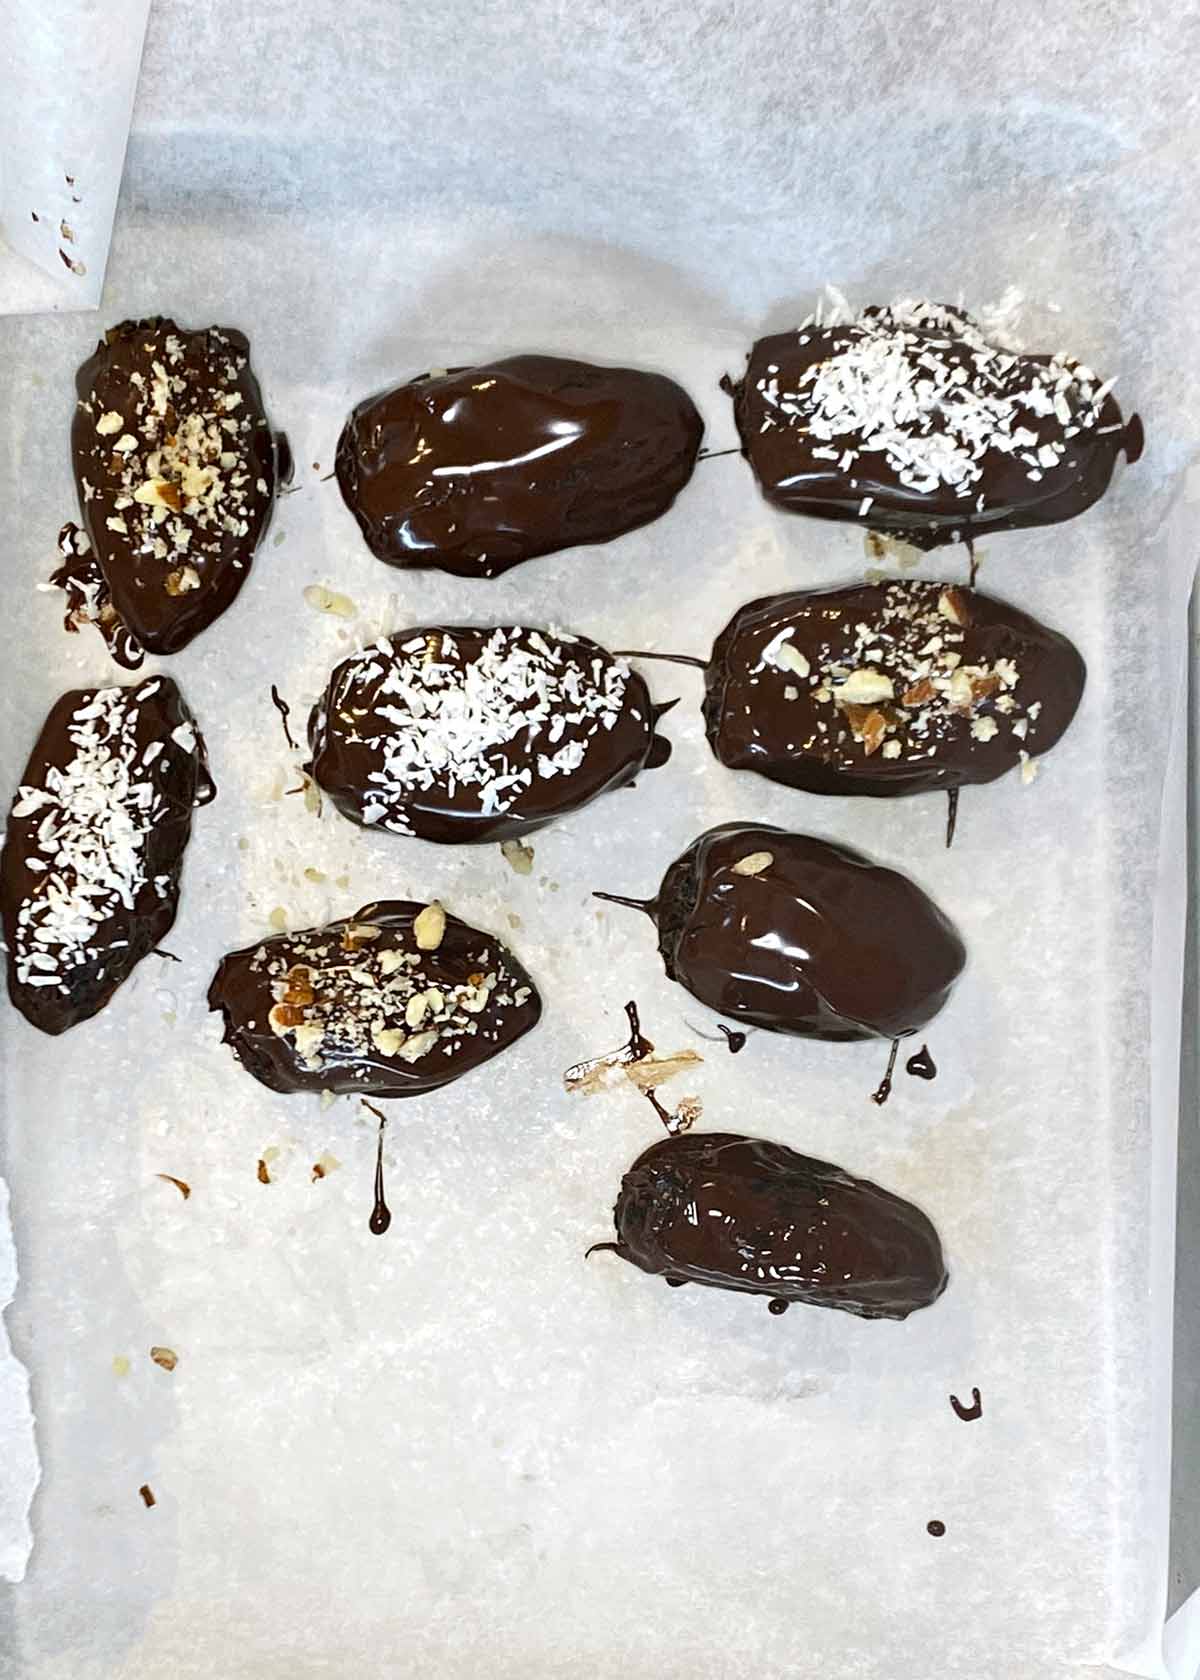 Chocolate covered dates on a lined tray topped with crushed nuts and desiccated coconut.